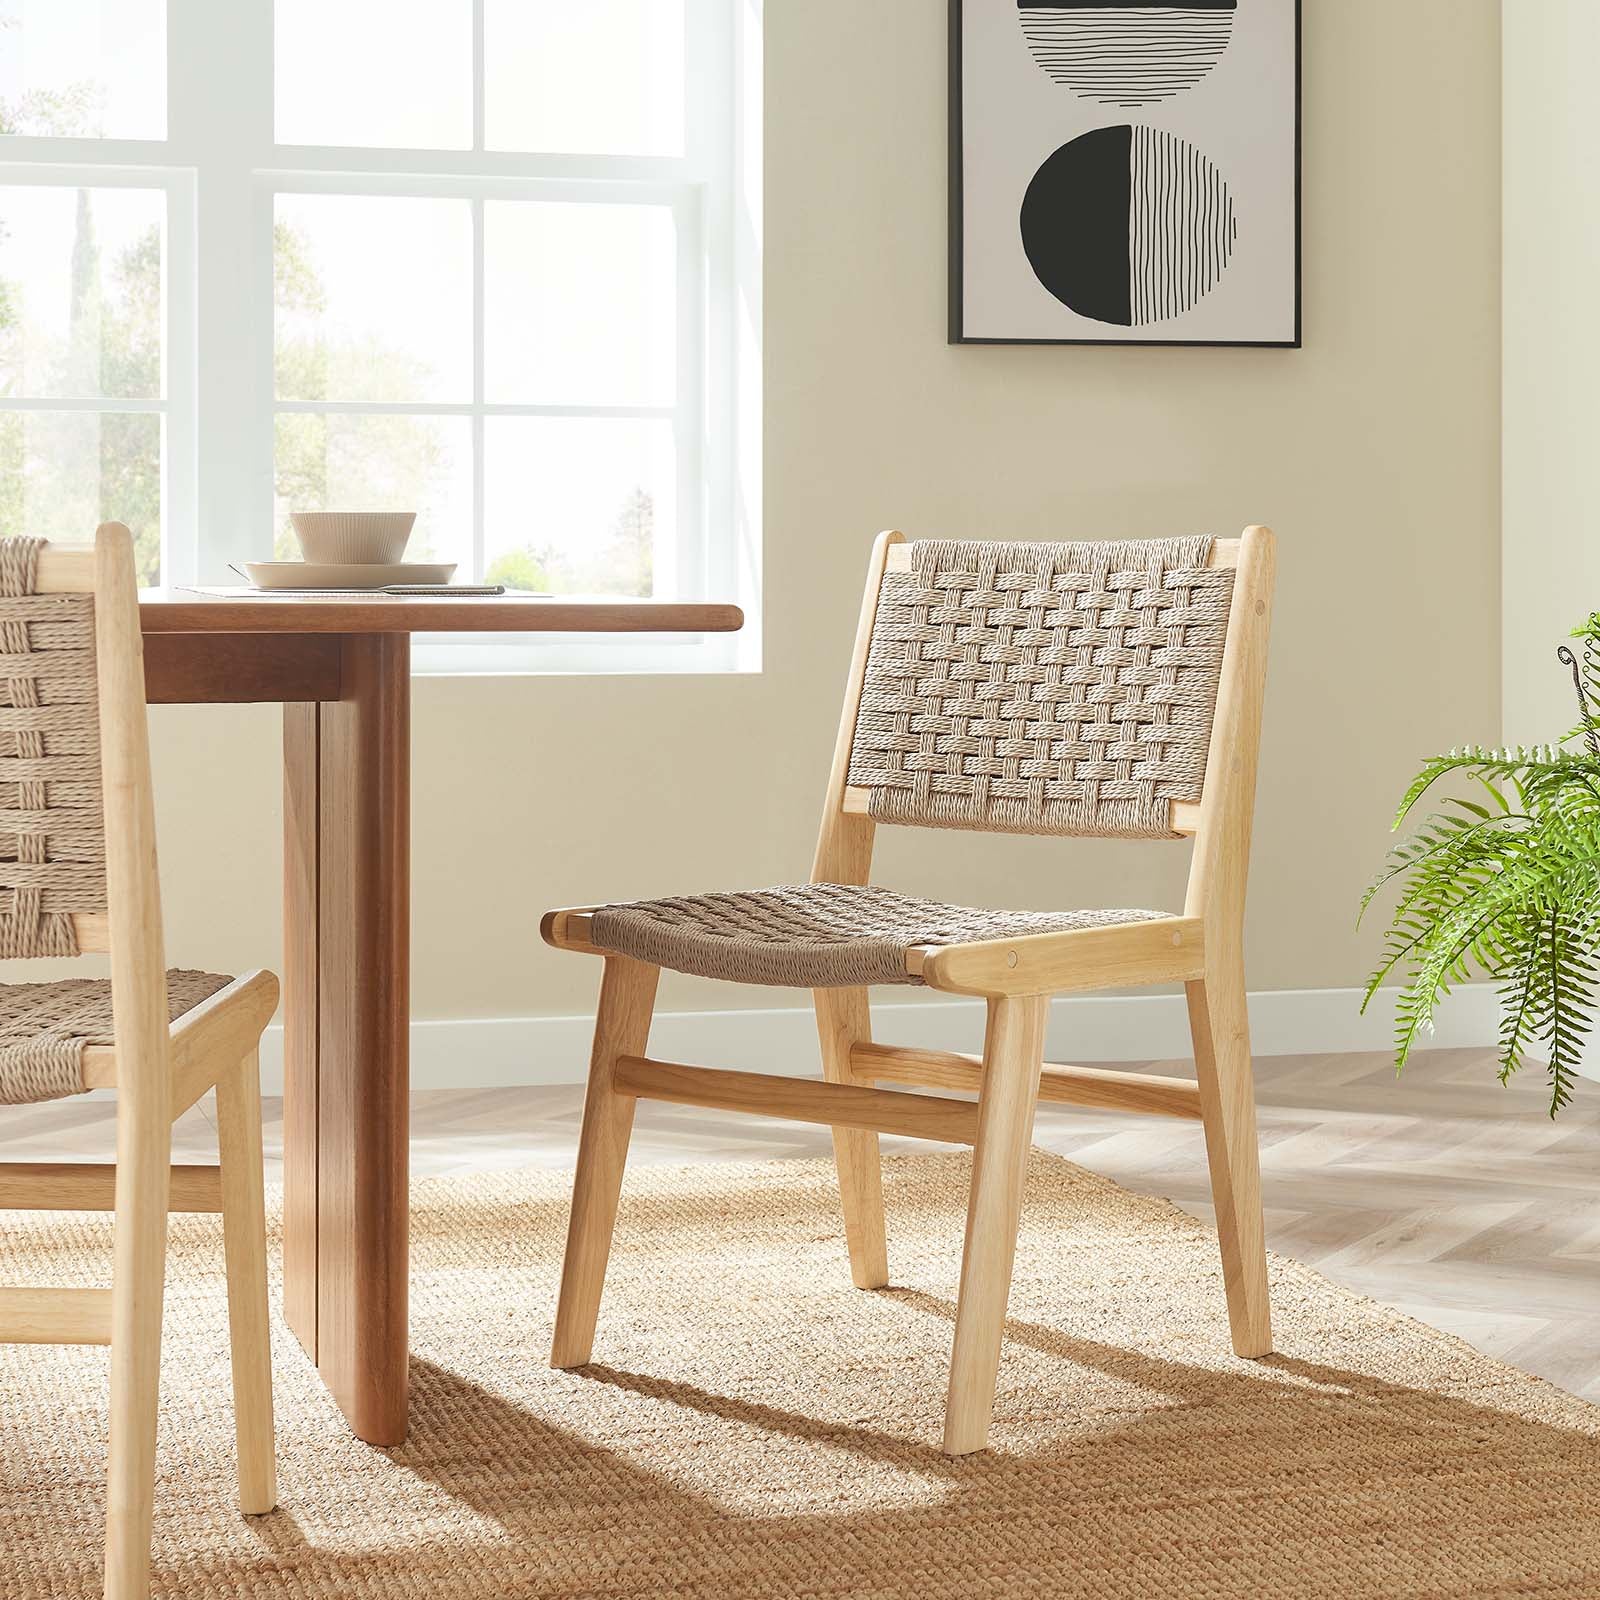 Saoirse Woven Rope Wood Dining Side Chair - Set of 2